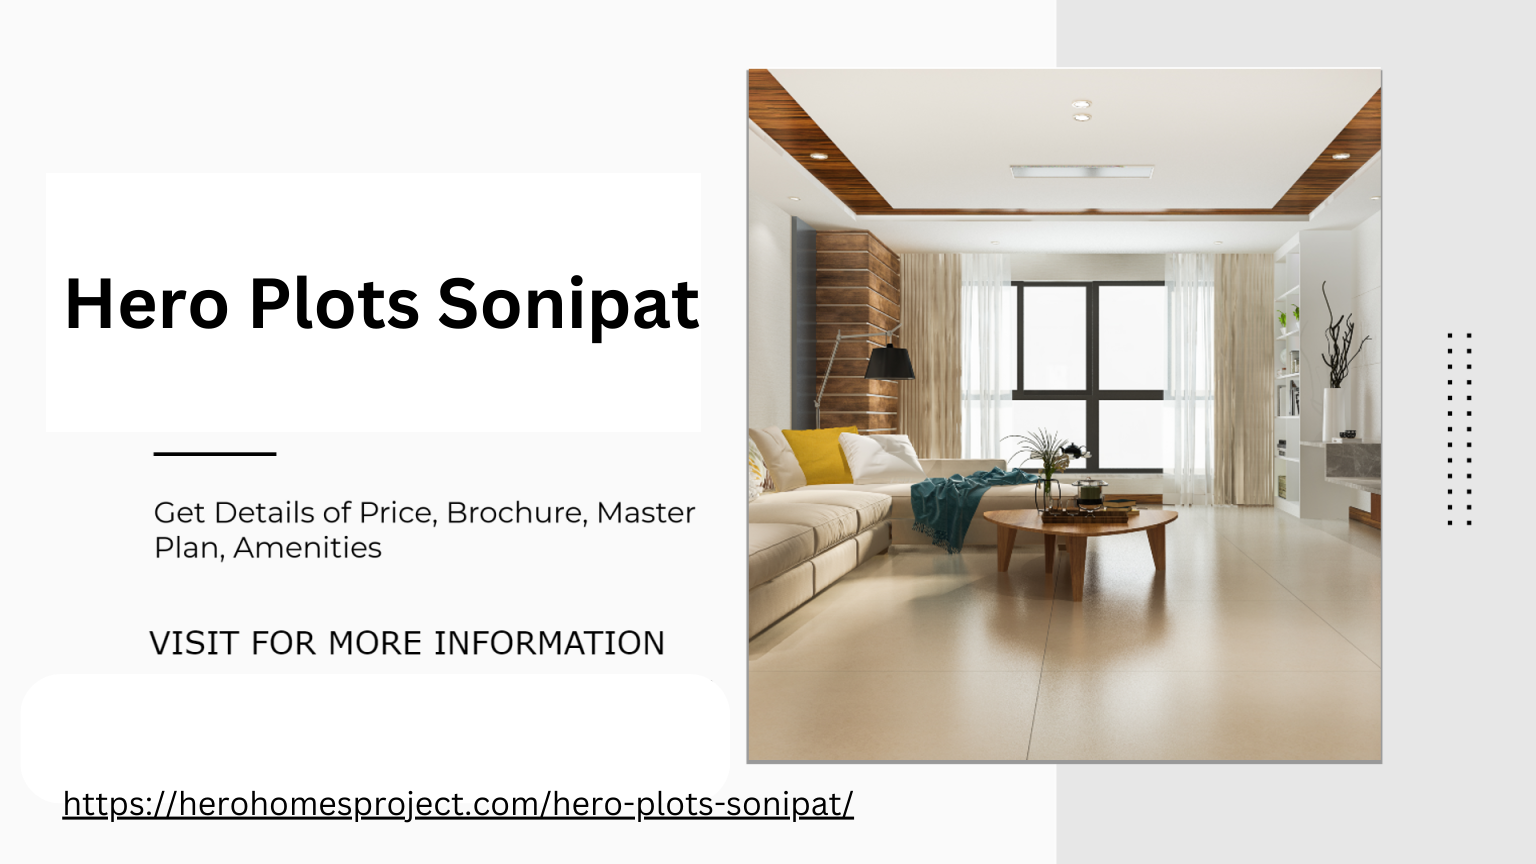 Hero Plots Sonipat: Sector 33 Finest Residential Options